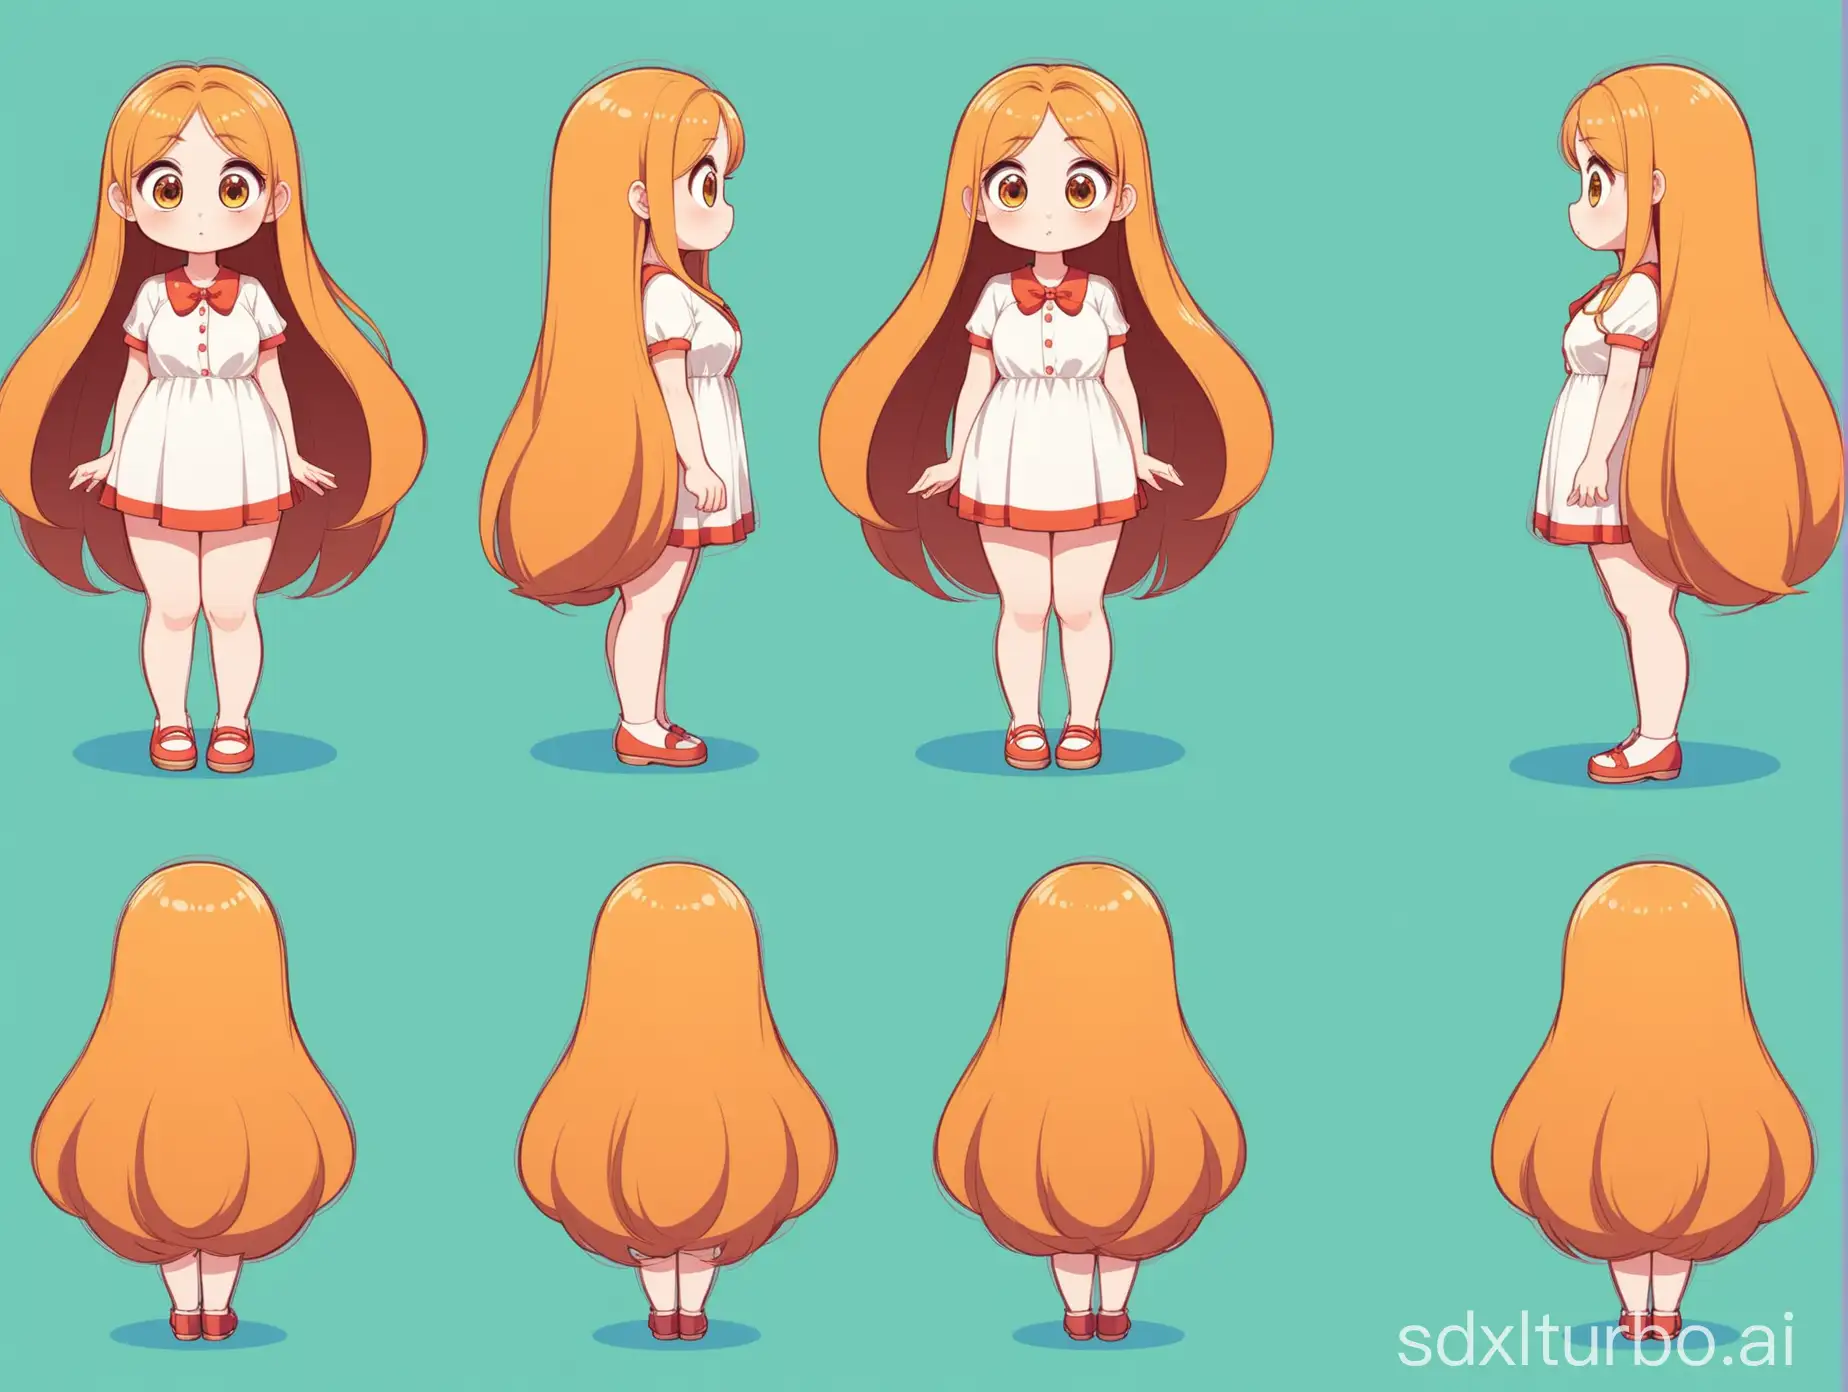 Adorable-Cartoon-Girl-with-Long-Hair-and-Big-Eyes-from-Multiple-Perspectives